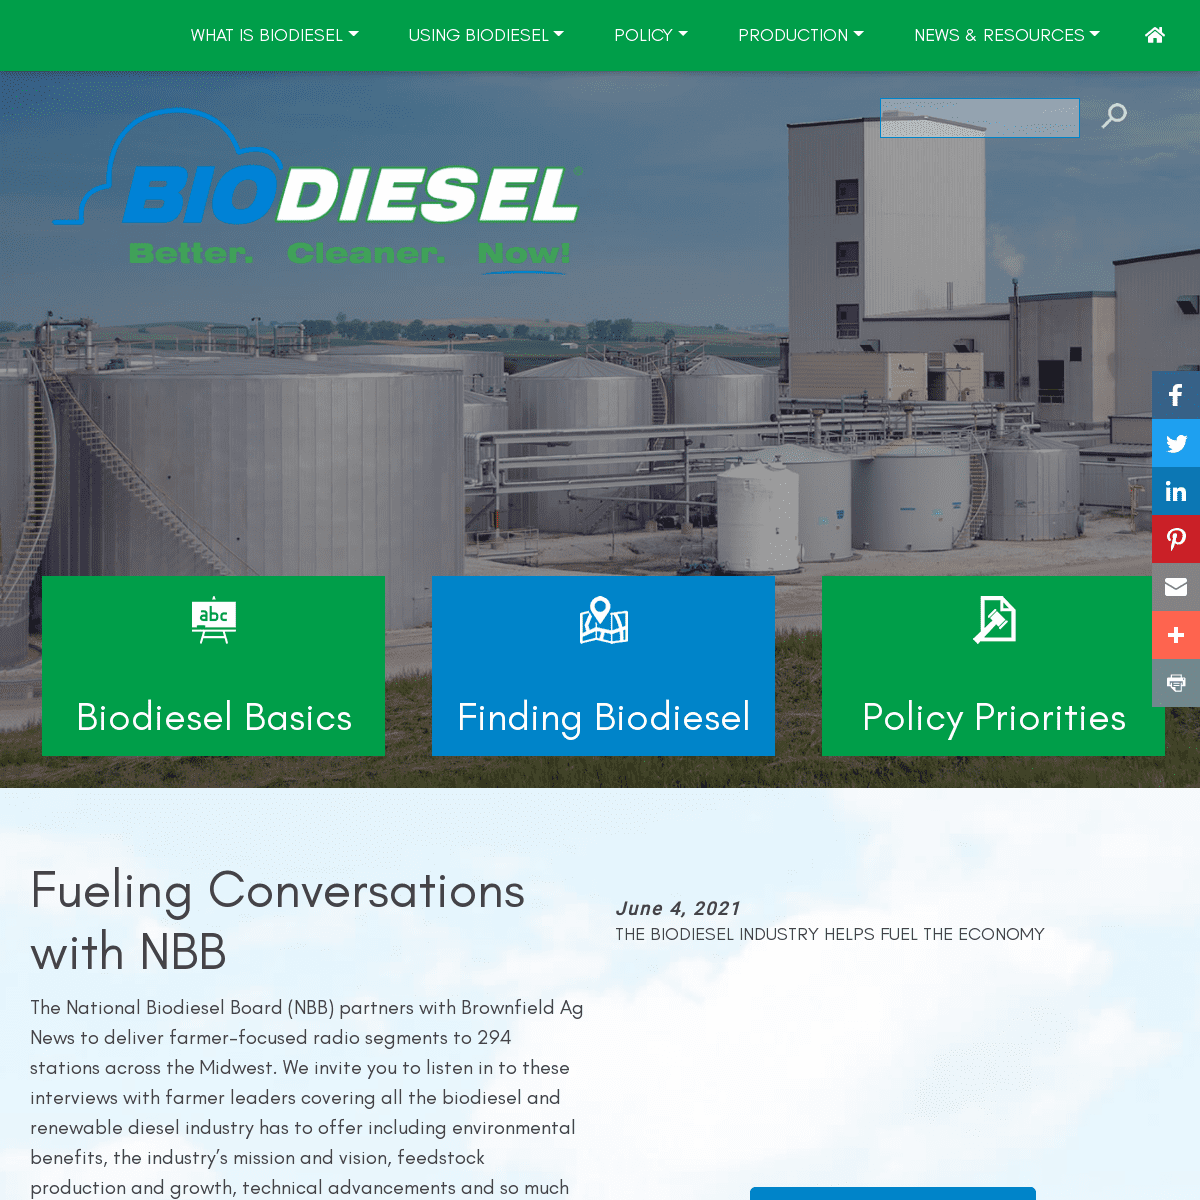 A complete backup of https://biodiesel.org